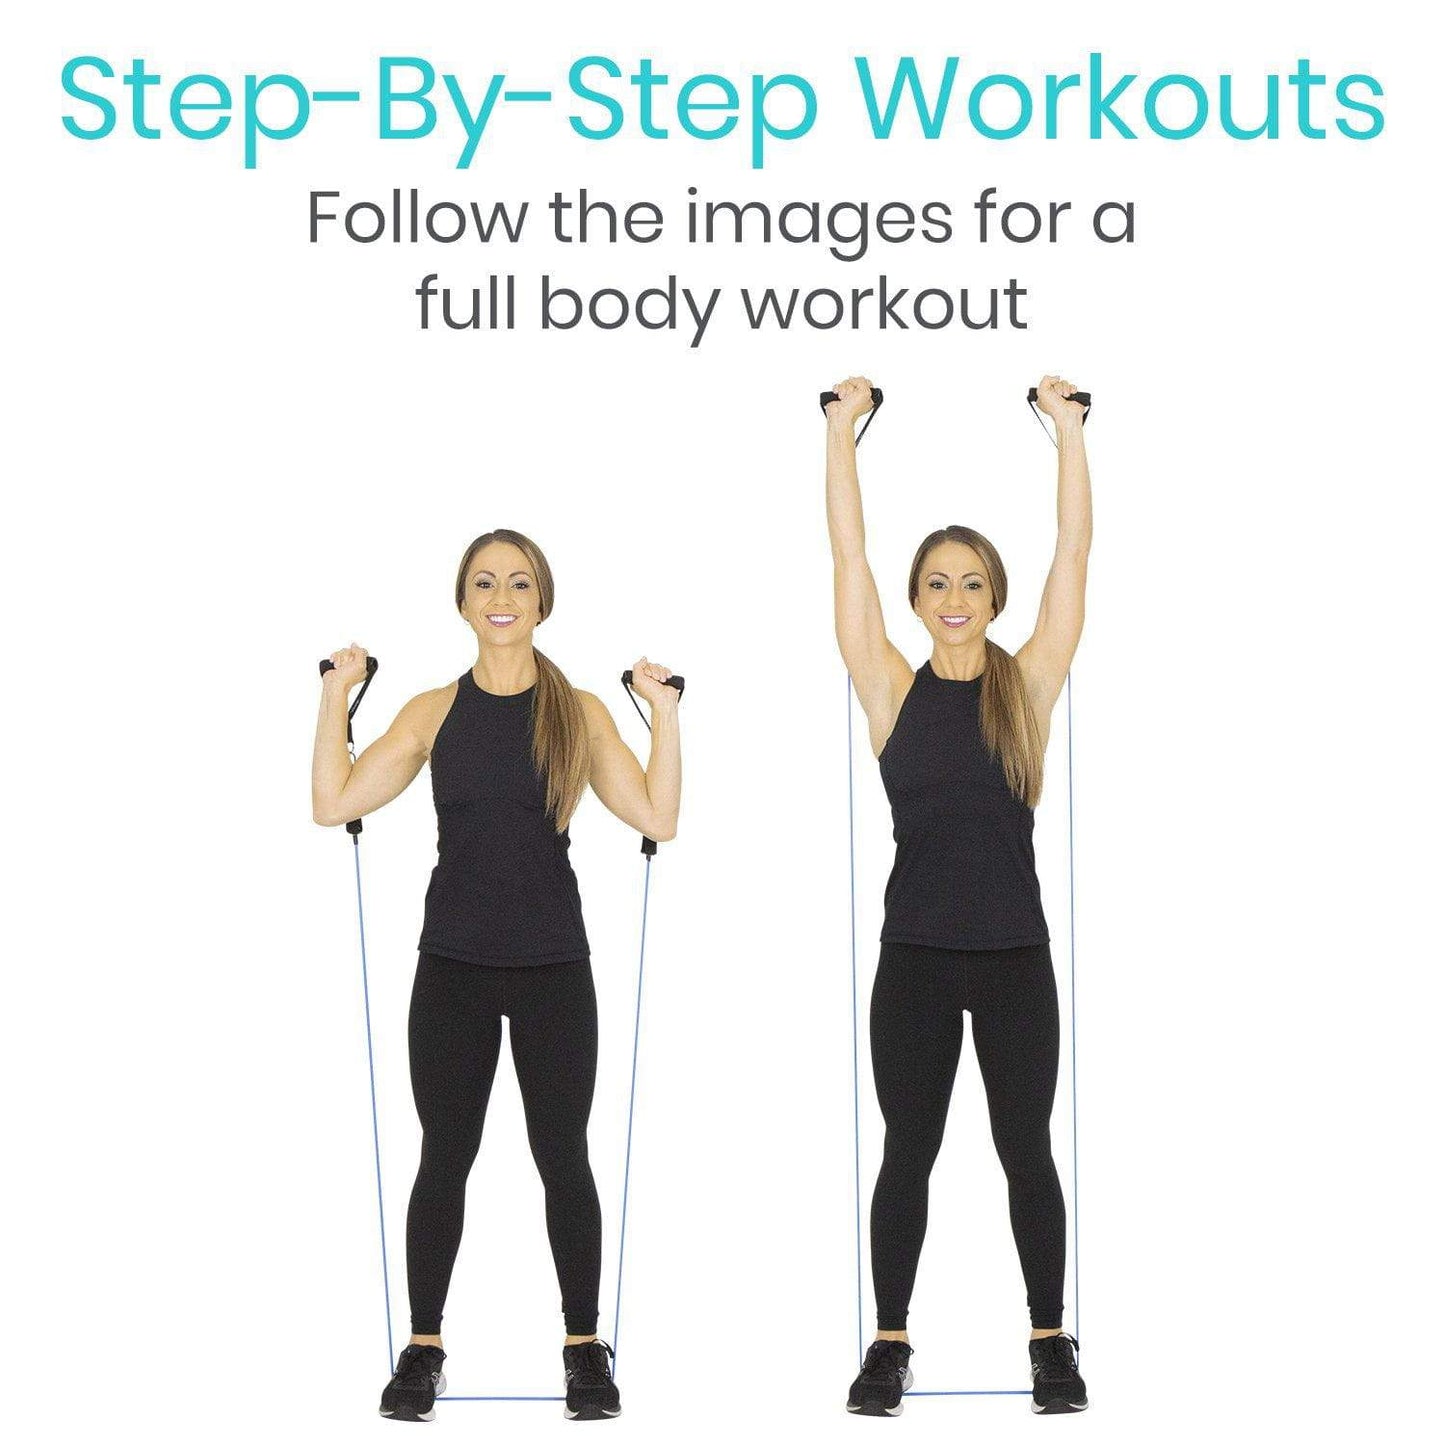 Resistance Band Poster